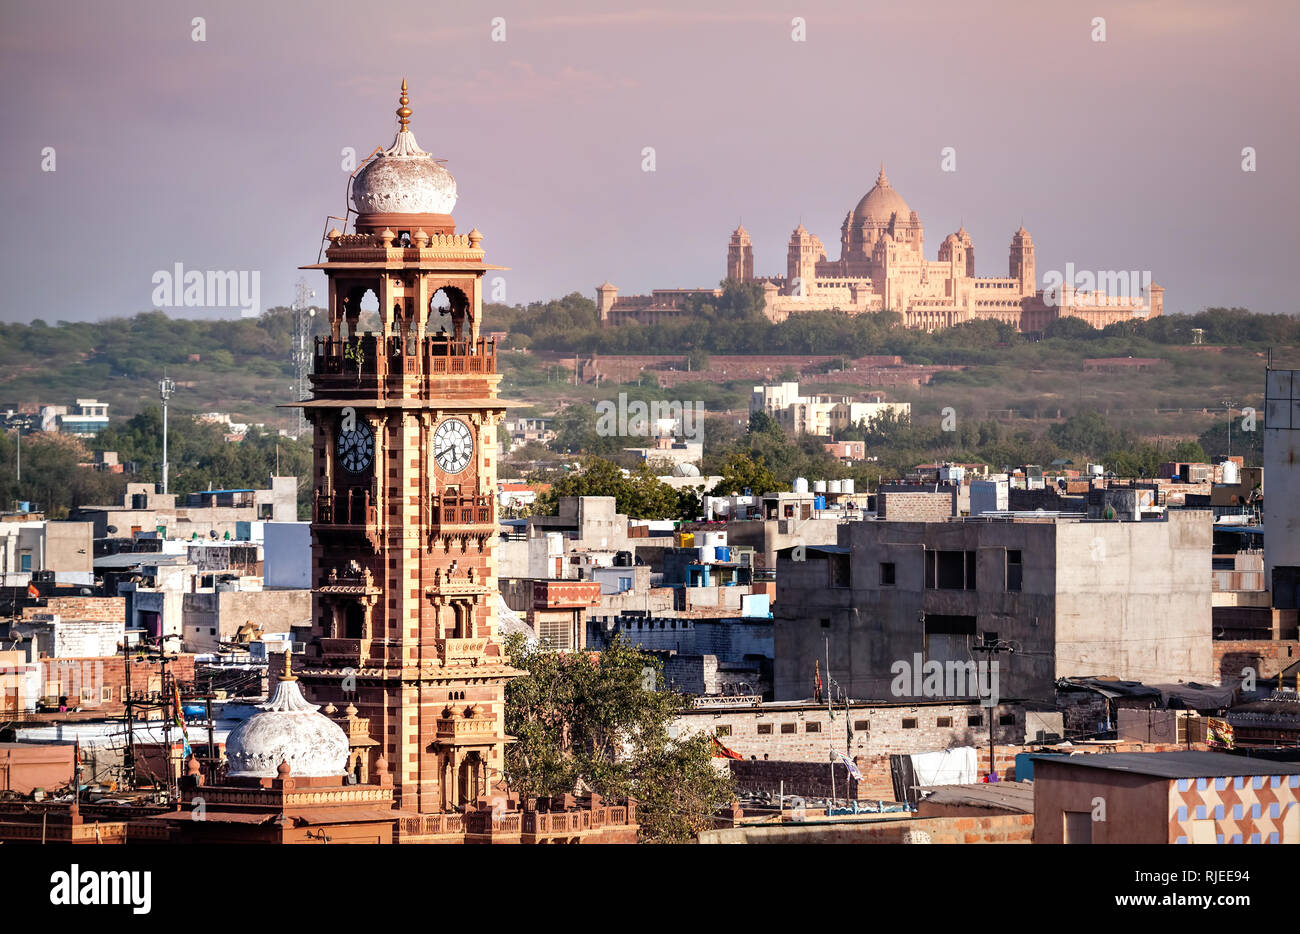 Clock tower known as Ghanta Ghar in Blue city market square in Jodhpur, Rajasthan, India Stock Photo